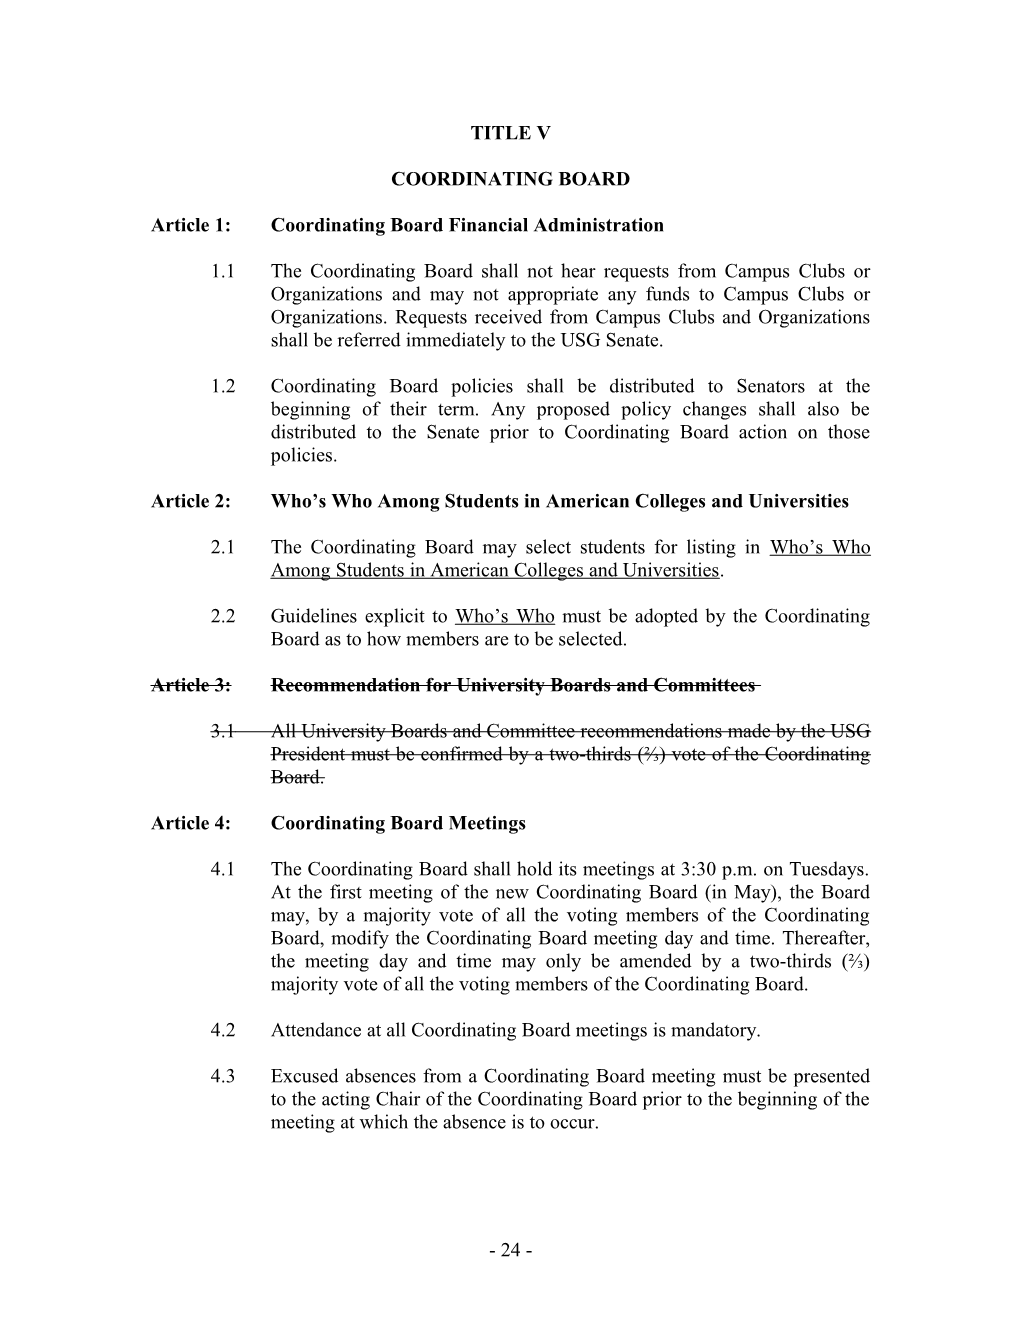 Article 1: Coordinating Board Financial Administration